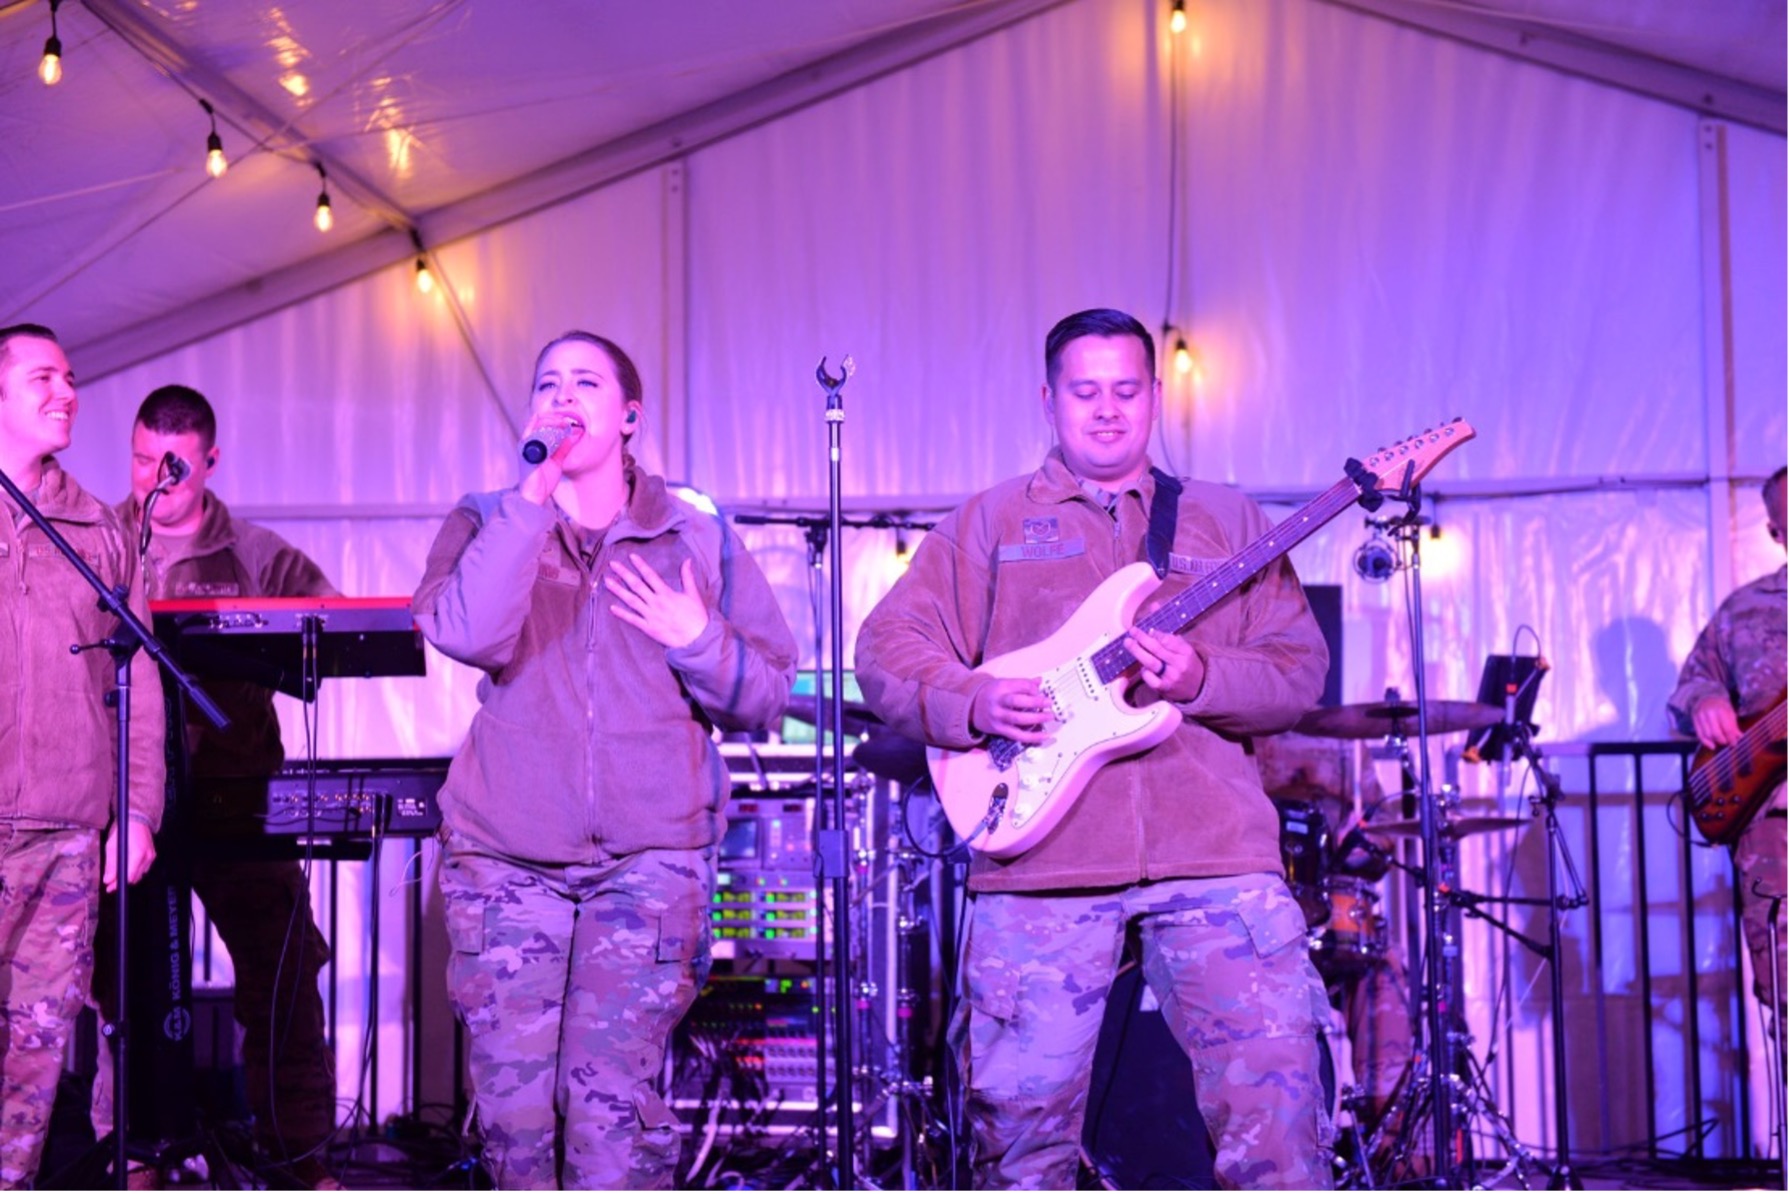 Velocity Air Force Band Performs at River of Lights